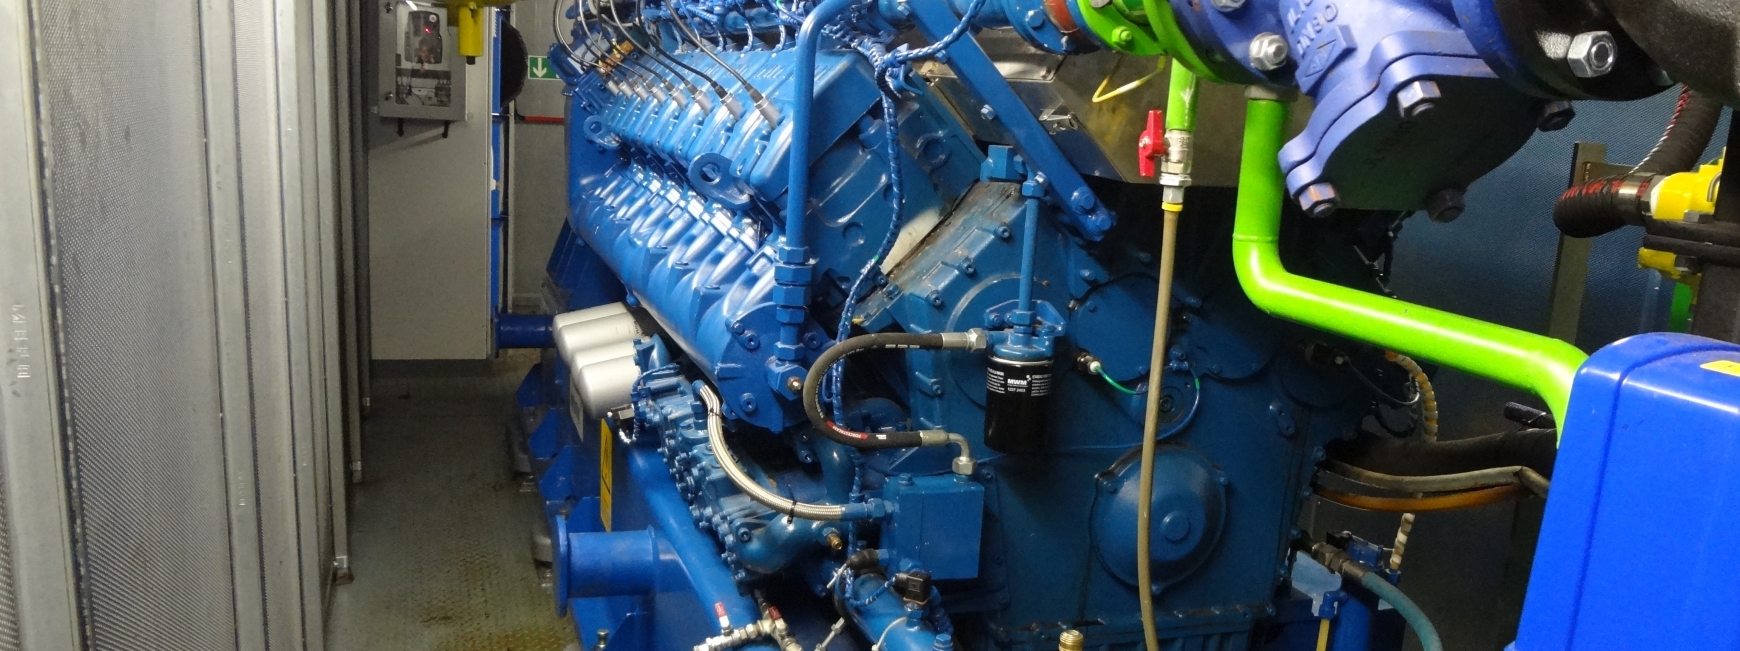 Blue Combined Heat and Power engine